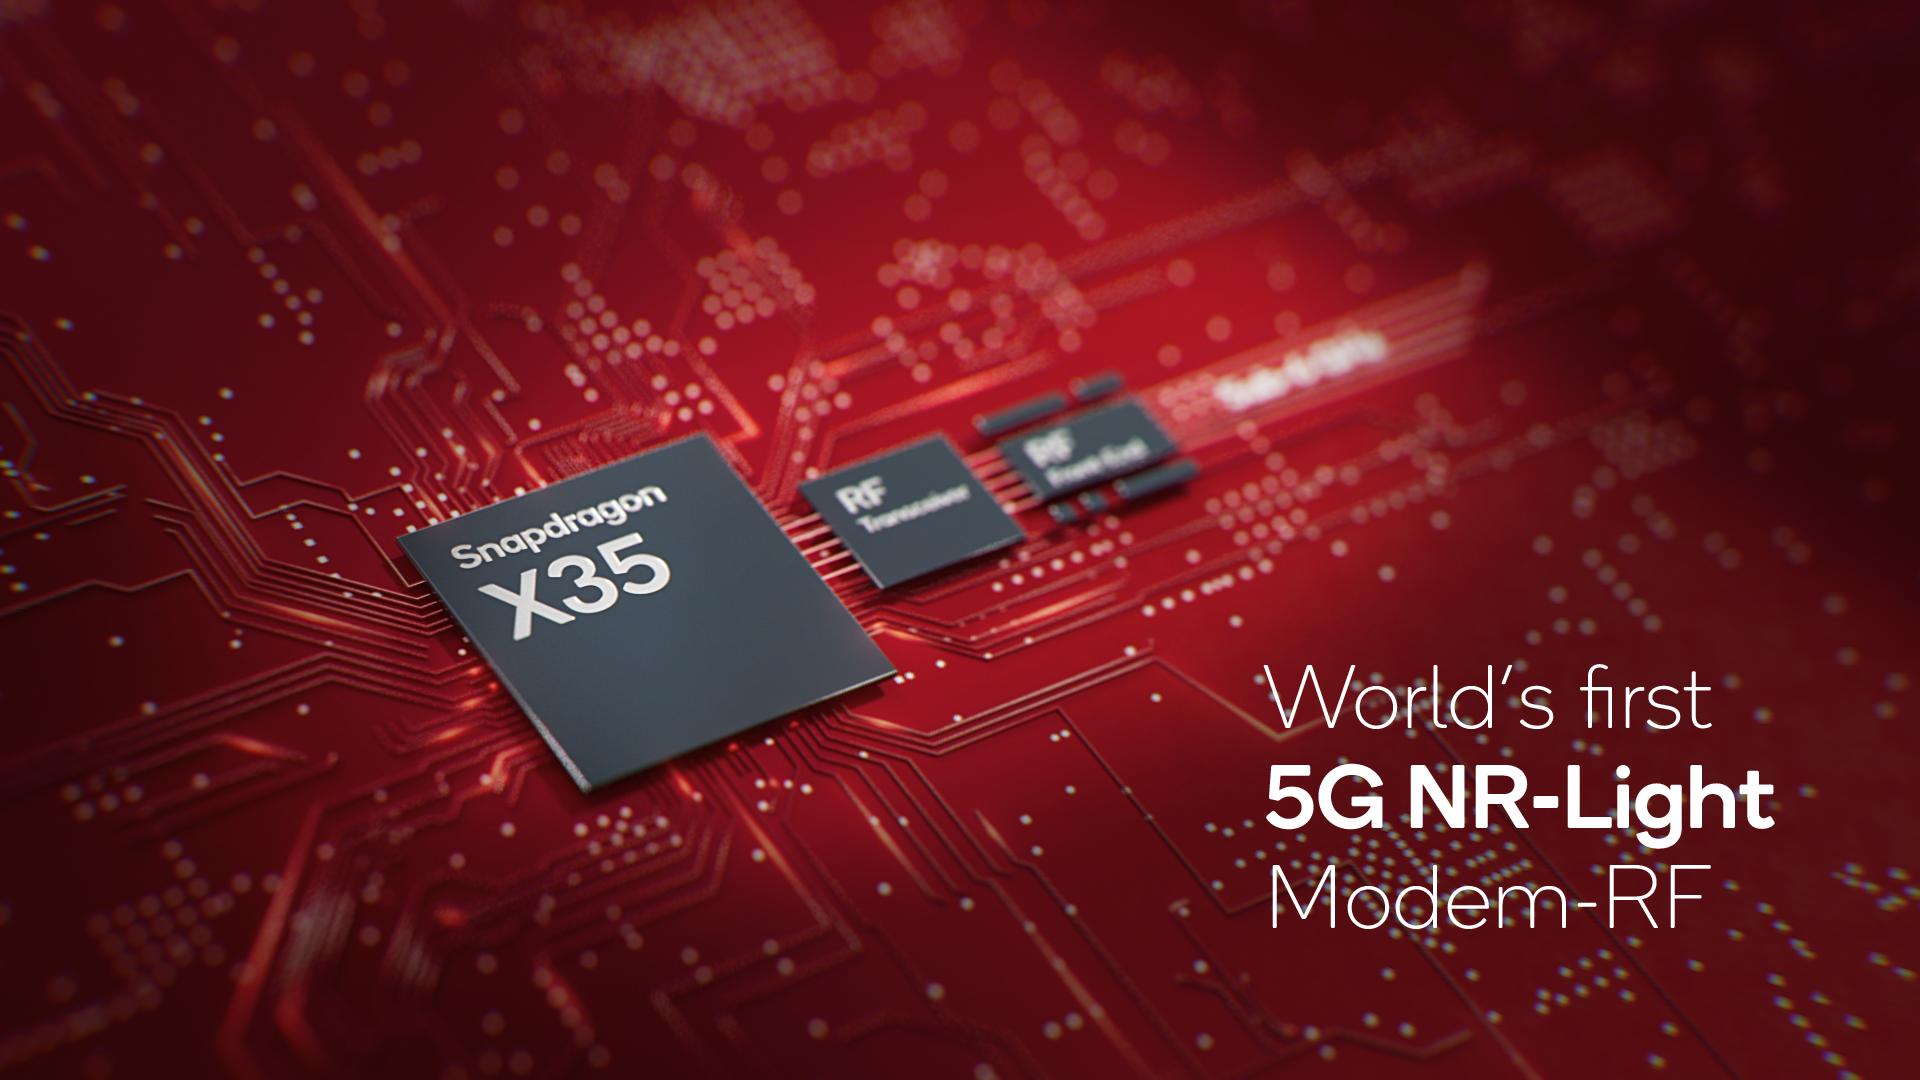 Qualcomm unveils Snapdragon X35 modem for 5G wearable and IoT devices